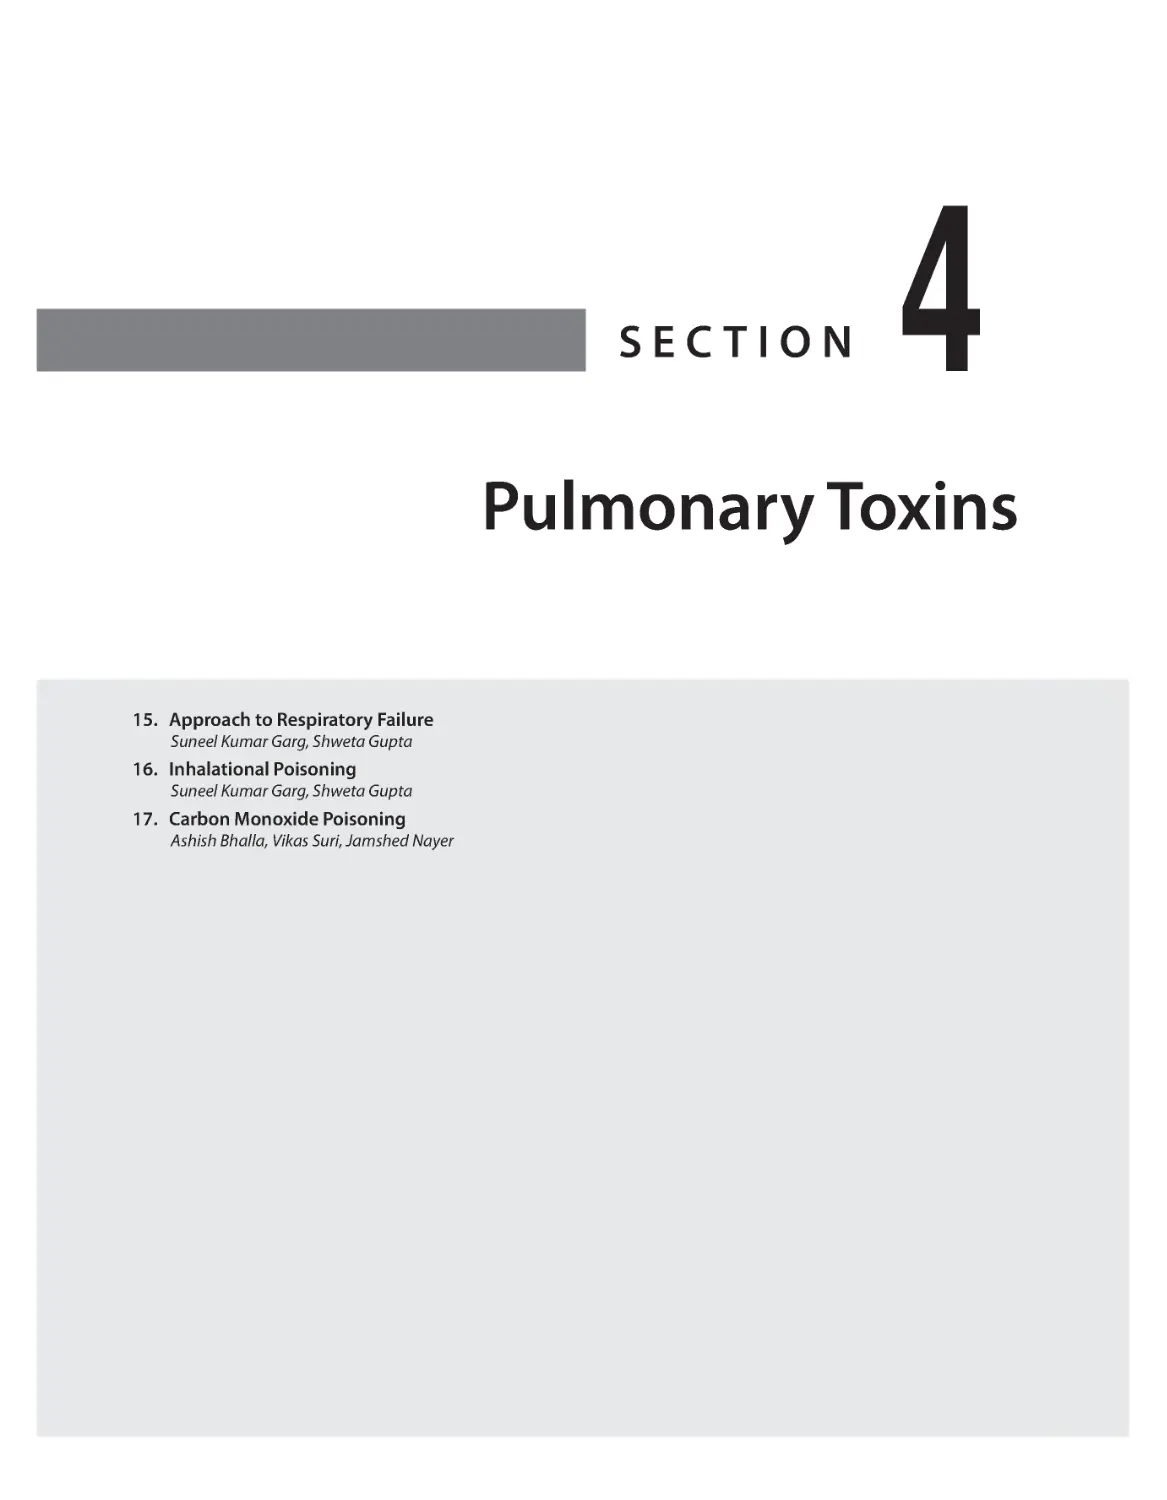 SECTION 4: Pulmonary Toxins